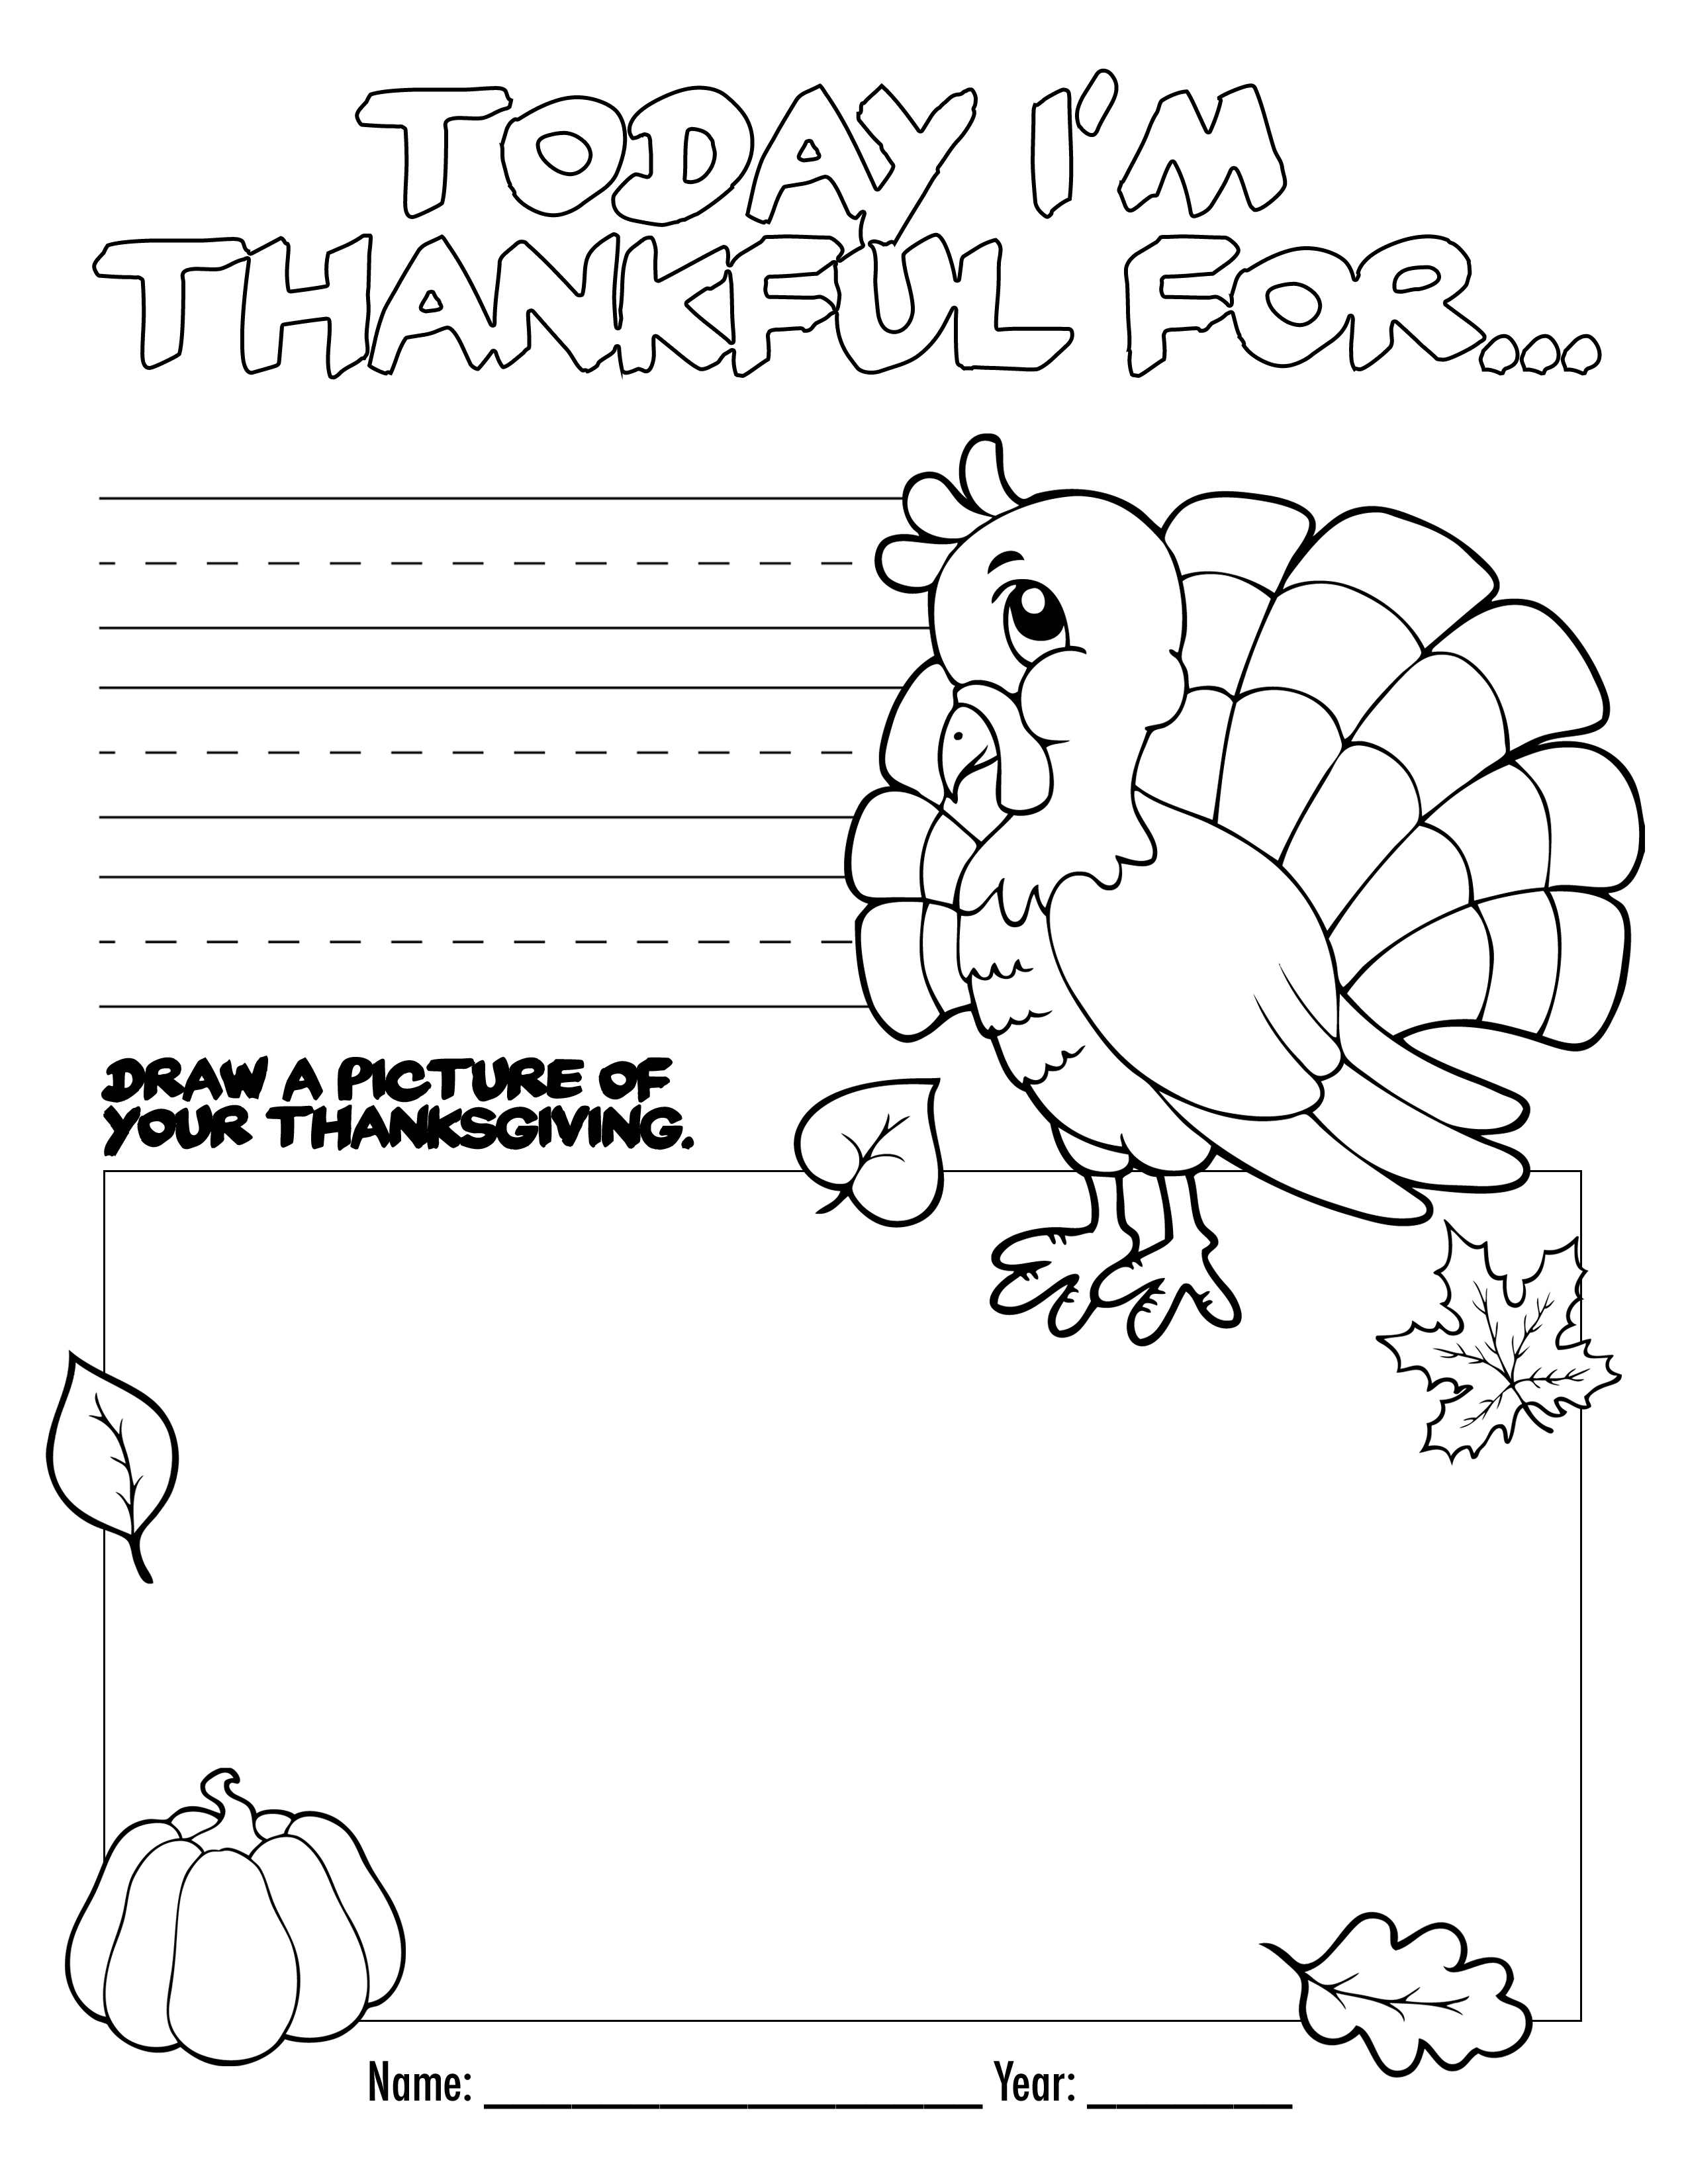 Thanksgiving Coloring Book Free Printable For The Kids! - Free | Free Printable Preschool Thanksgiving Worksheets